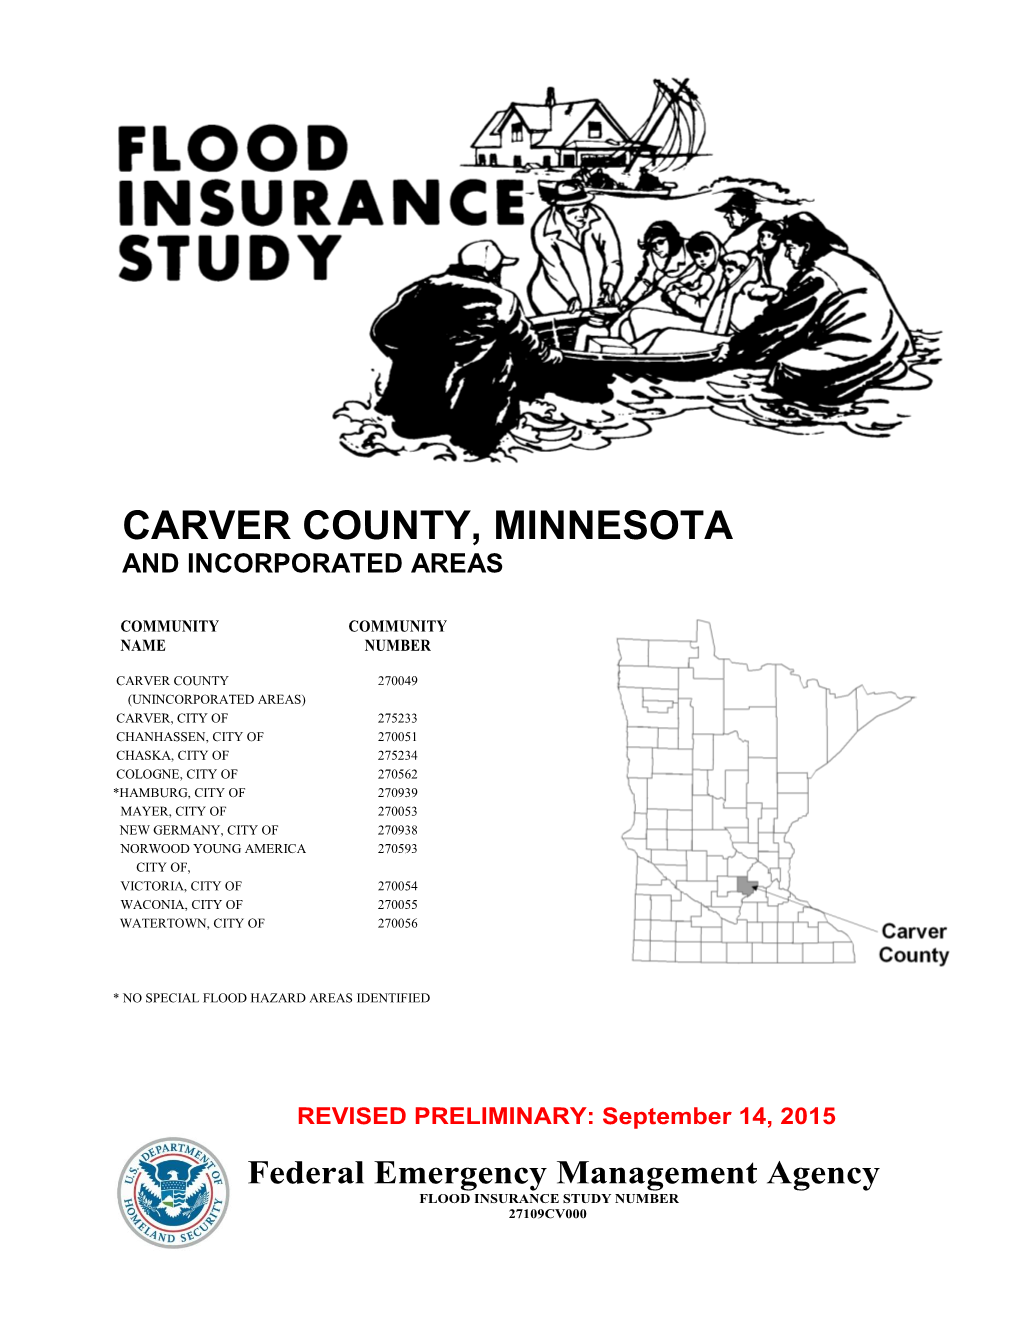 Flood Insurance Study Number 27109Cv000 Notice to Flood Insurance Study Users